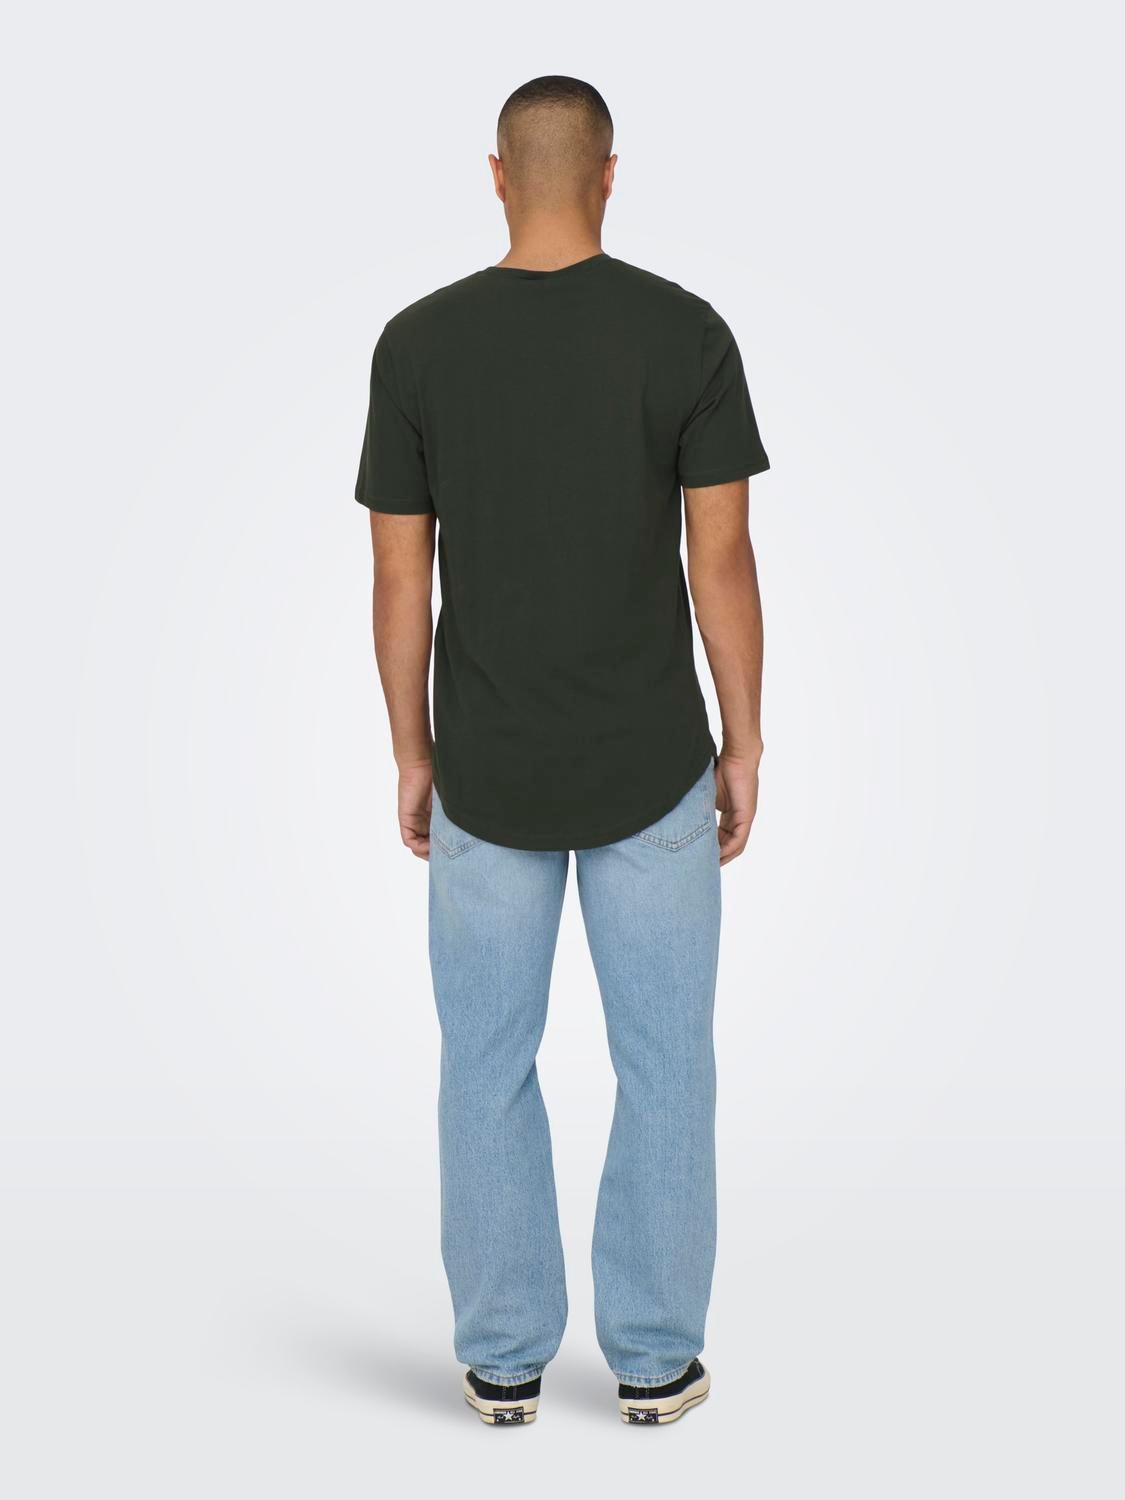 ONLY & SONS Long o-neck t-shirt -Rosin - 22002973